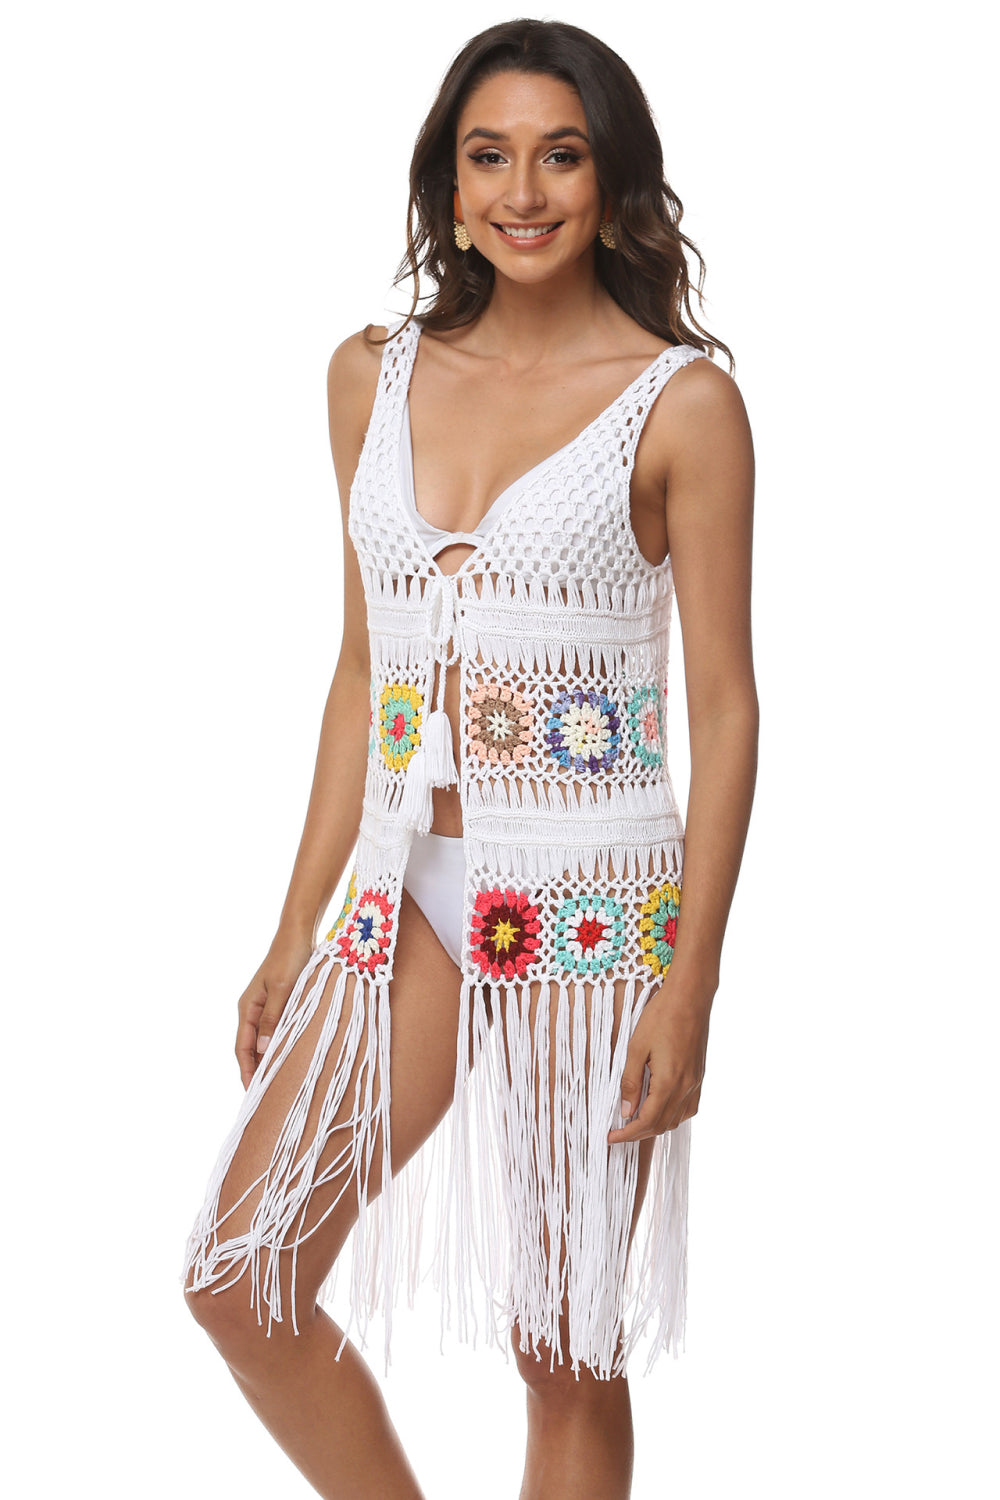 Openwork Fringe Detail Embroidery Sleeveless Cover-Up BLUE ZONE PLANET